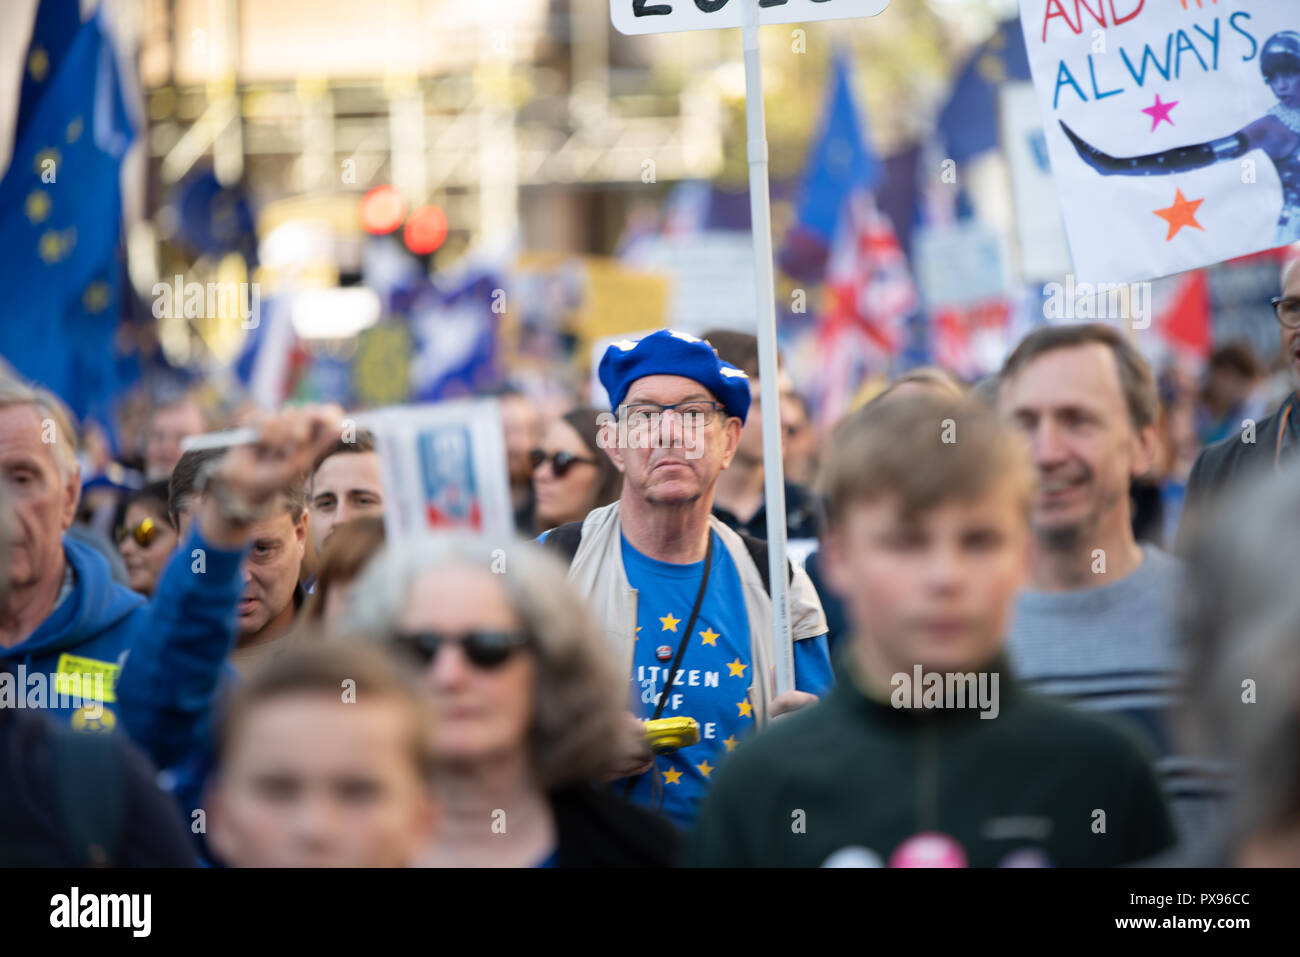 London, UK. 20 October 2018  Hundreds of thousands have turned up in London from around the country to march for a People’s Vote.  They want a final vote on the Brexit deal.  Credit: Ilyas Ayub/Alamy Live News Stock Photo